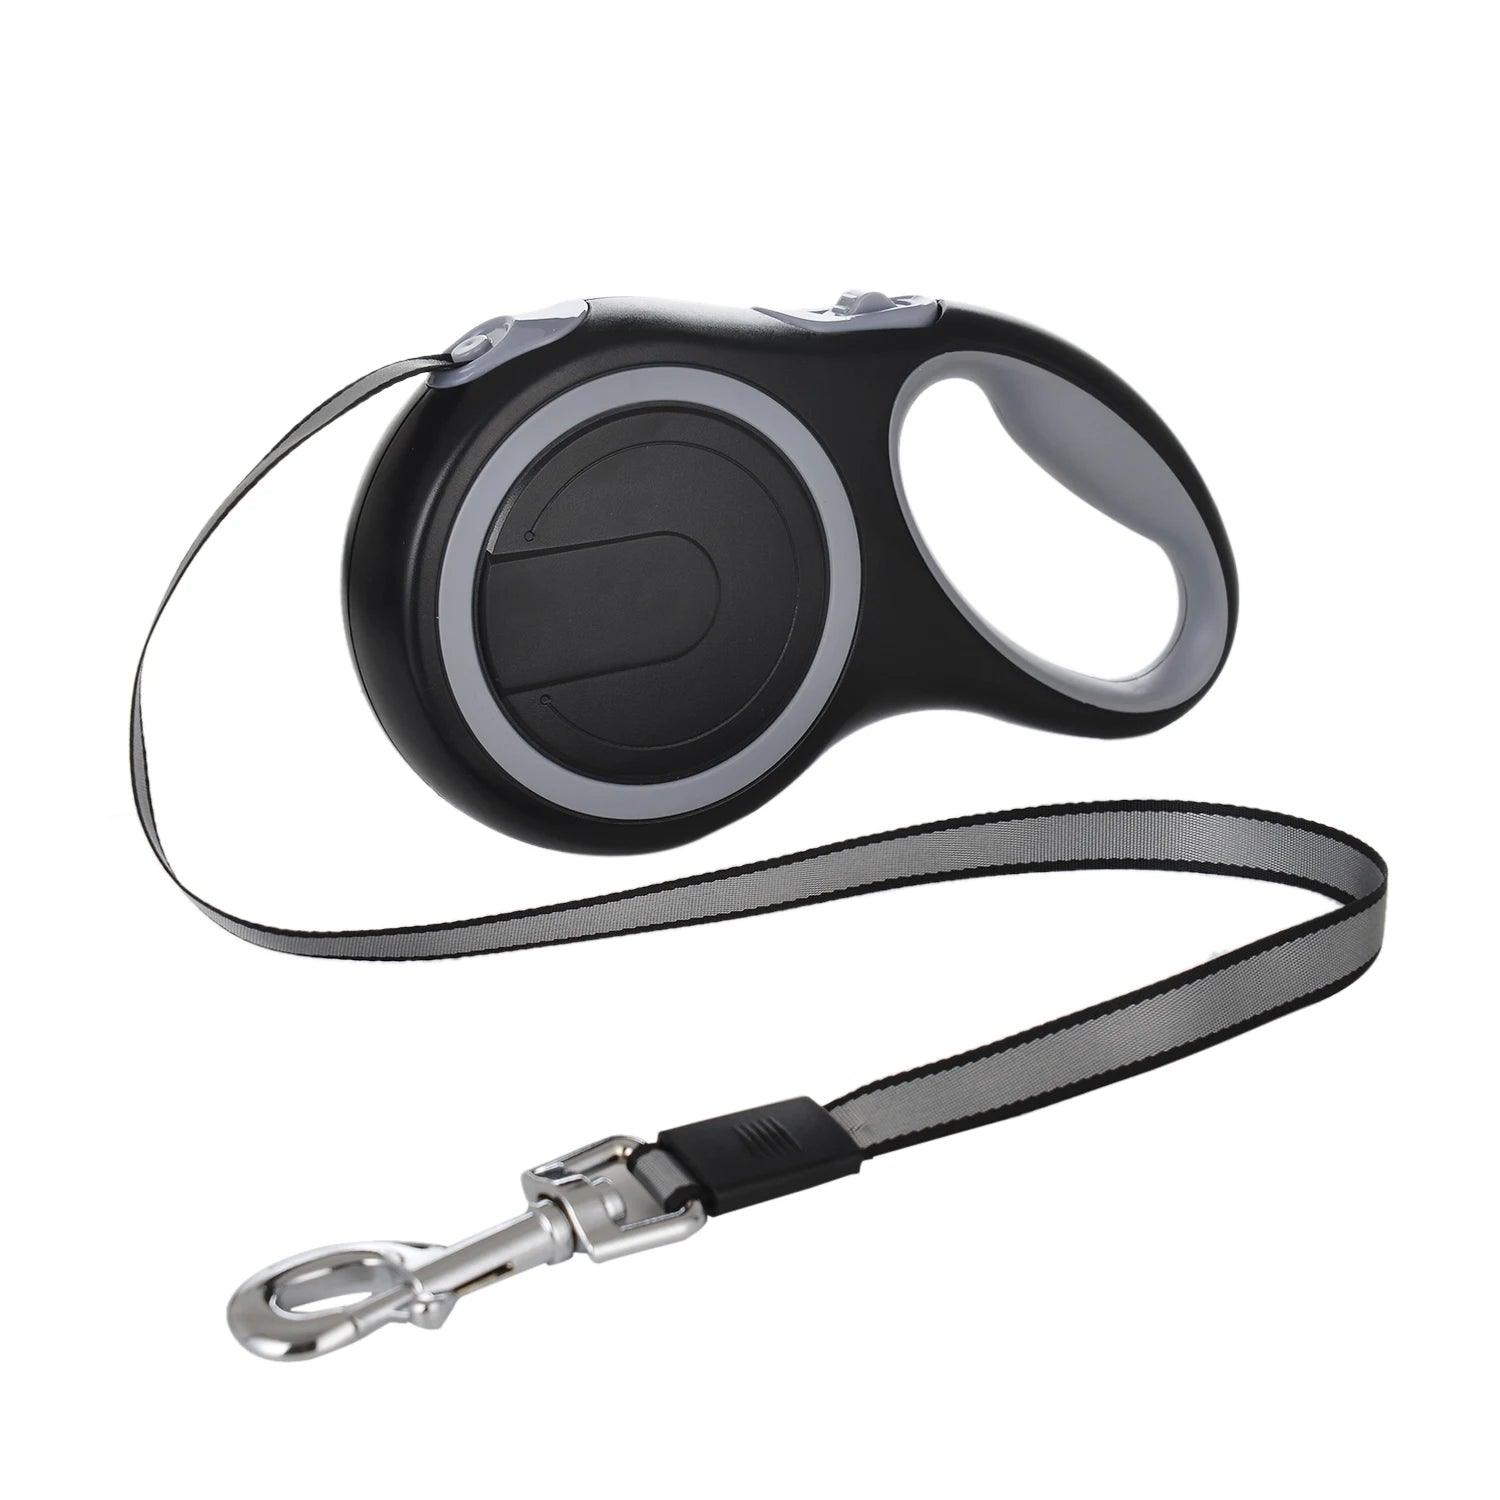 Adjustable Nylon Dog Leash with Retractable Roulette Collar - Ideal for Walking, Hiking, and More  ourlum.com   